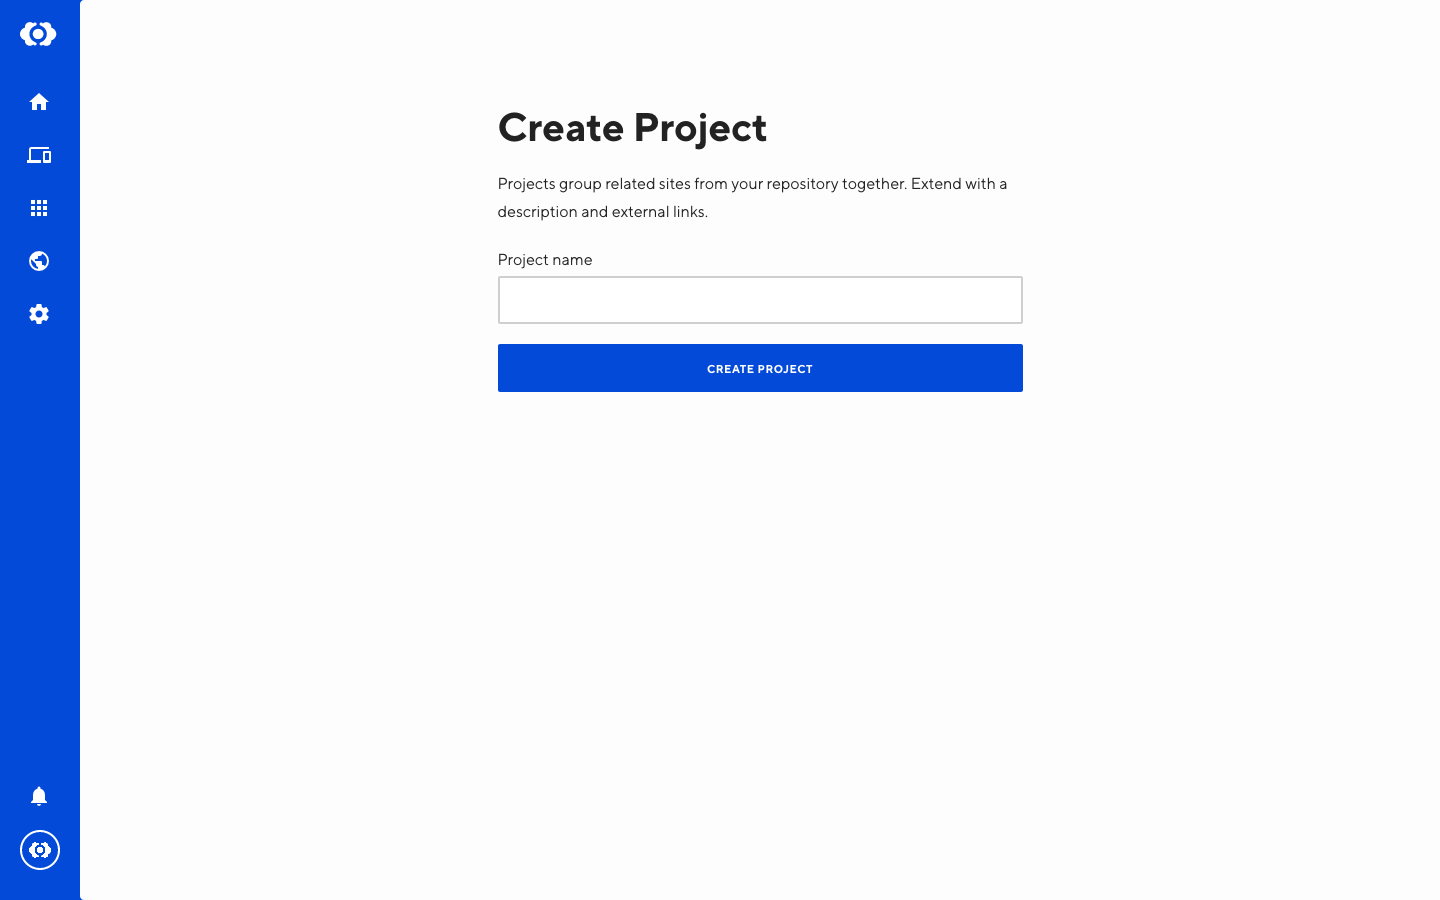 Screenshot of Project creation interface